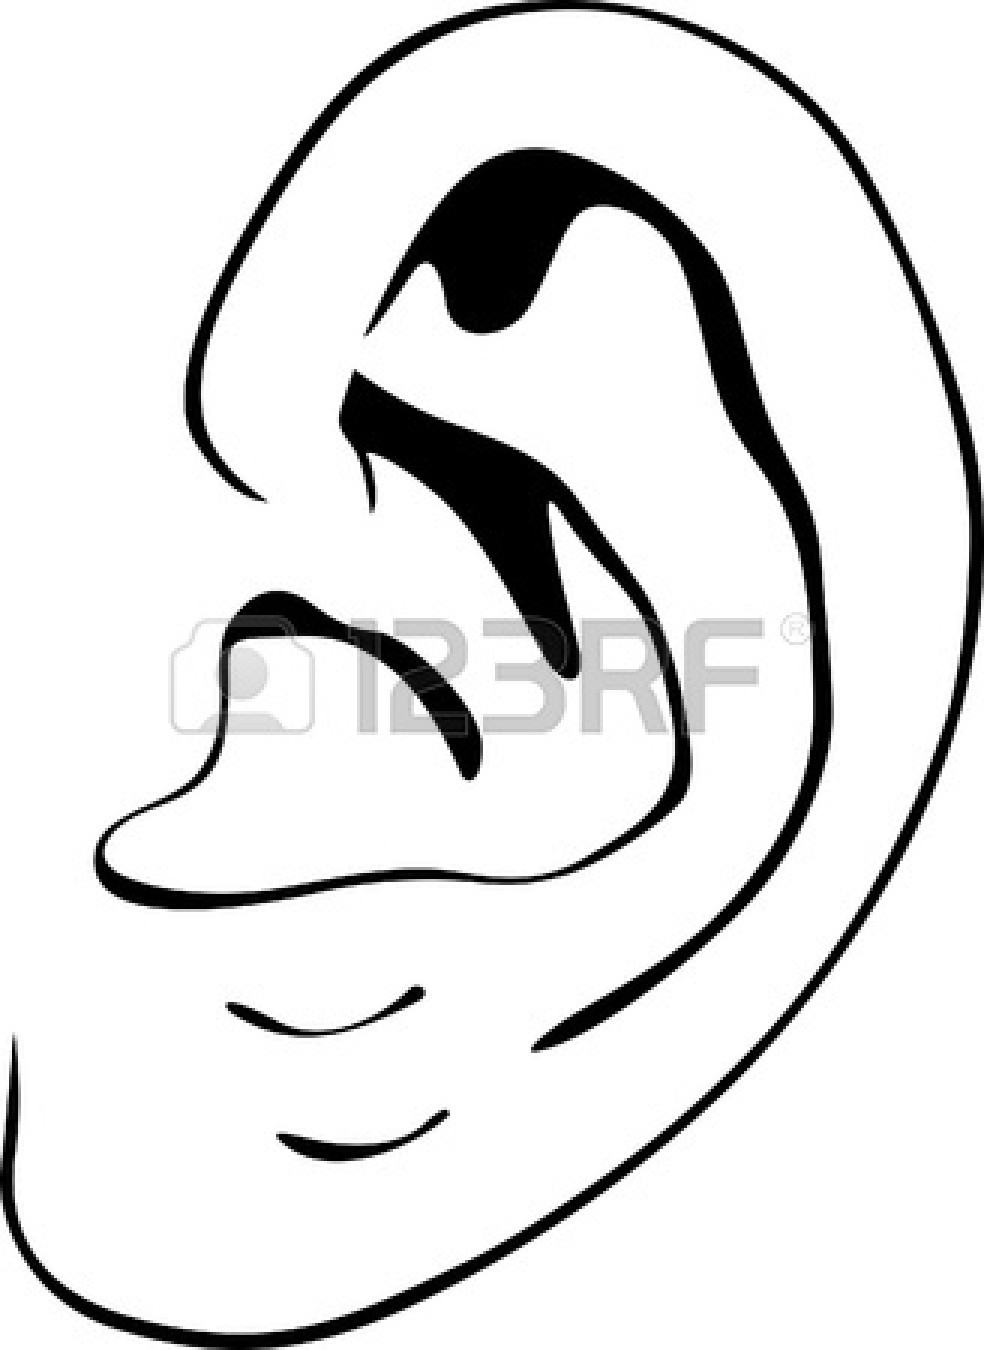 Ears Clipart Black And White   Clipart Panda   Free Clipart Images